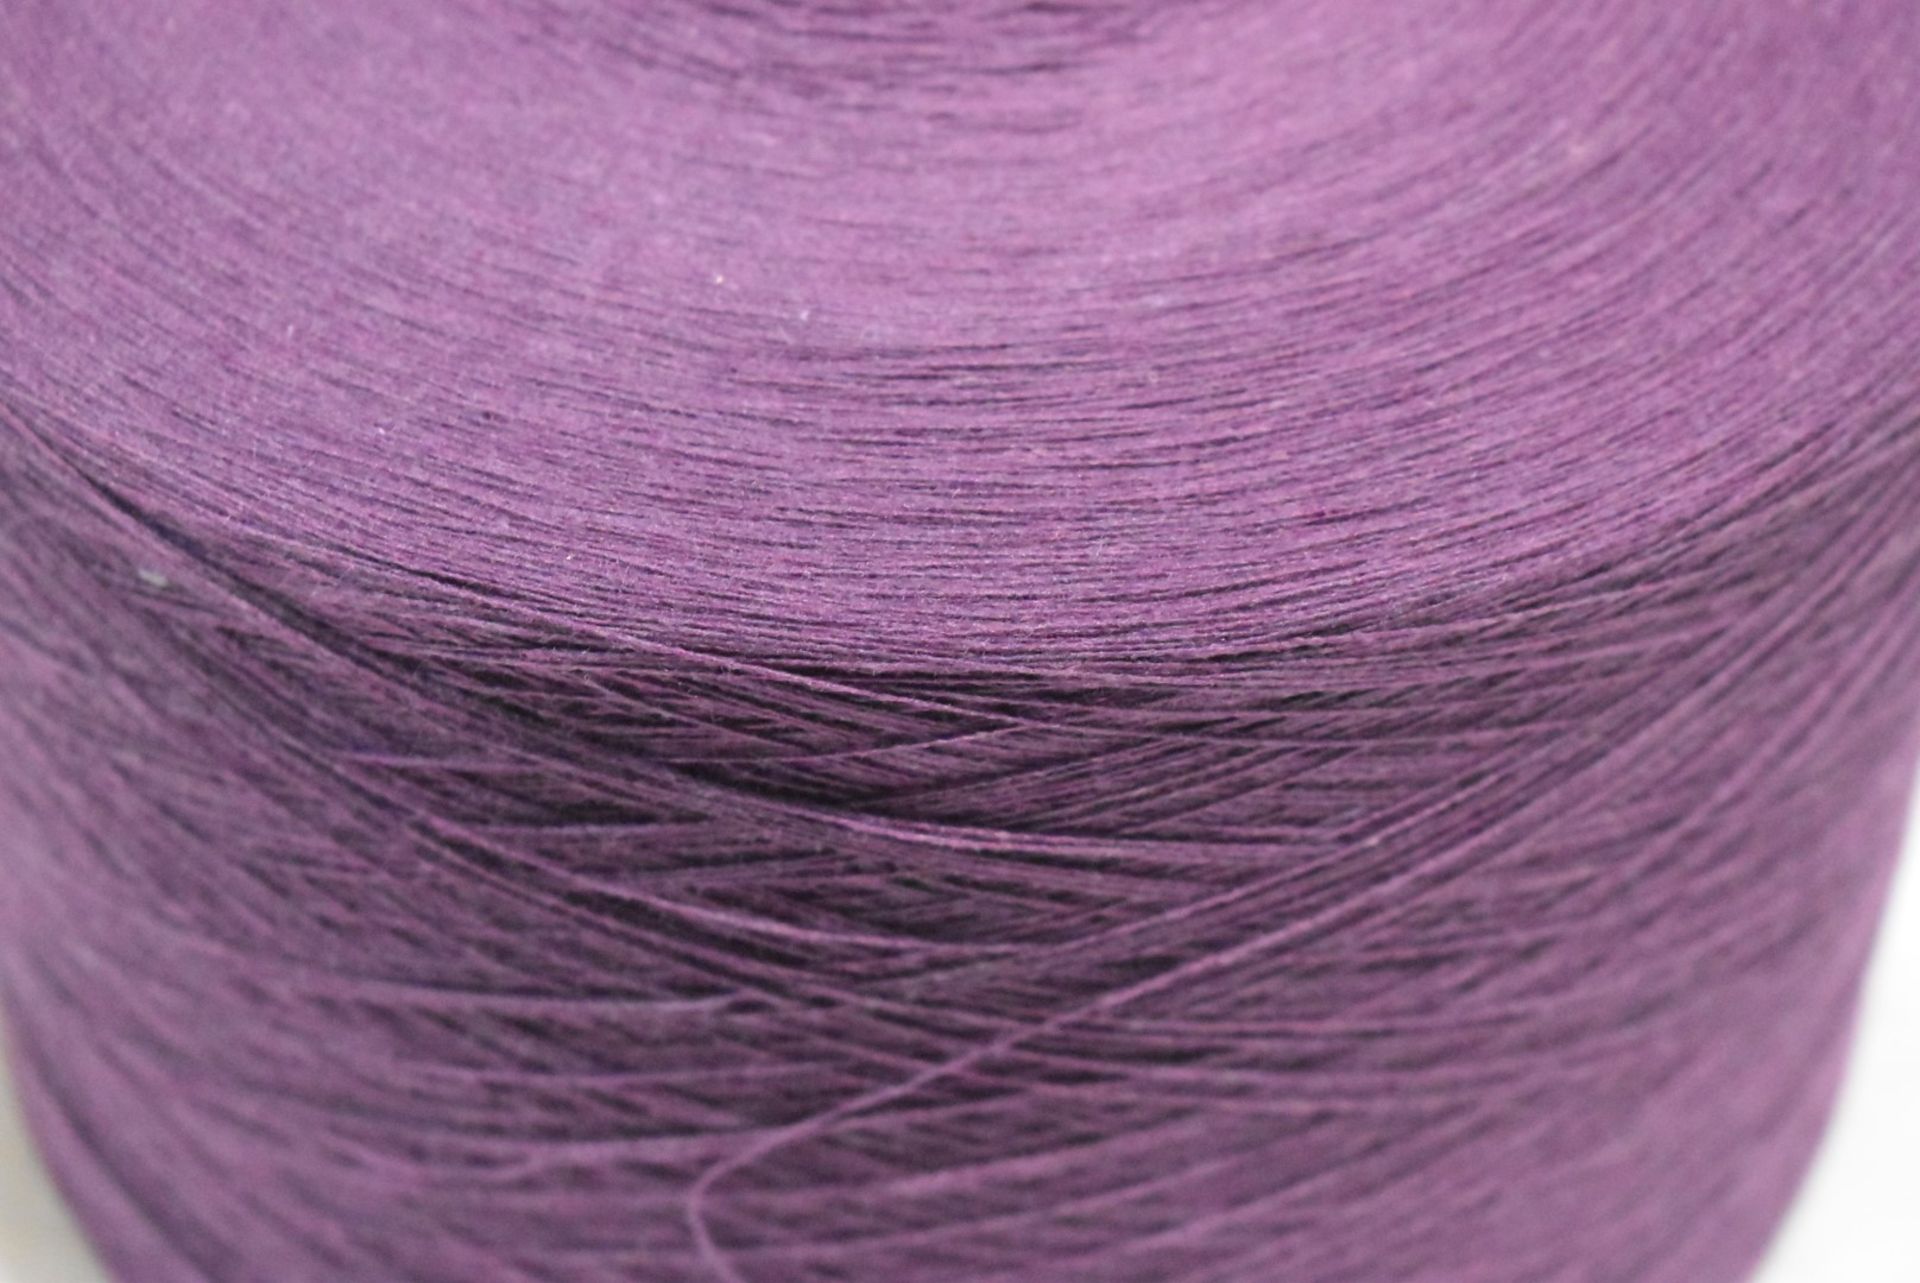 12 x Cones of 1/13 MicroCotton Knitting Yarn - Purple - Approx Weight: 2,300g - New Stock ABL Yarn - Image 3 of 9